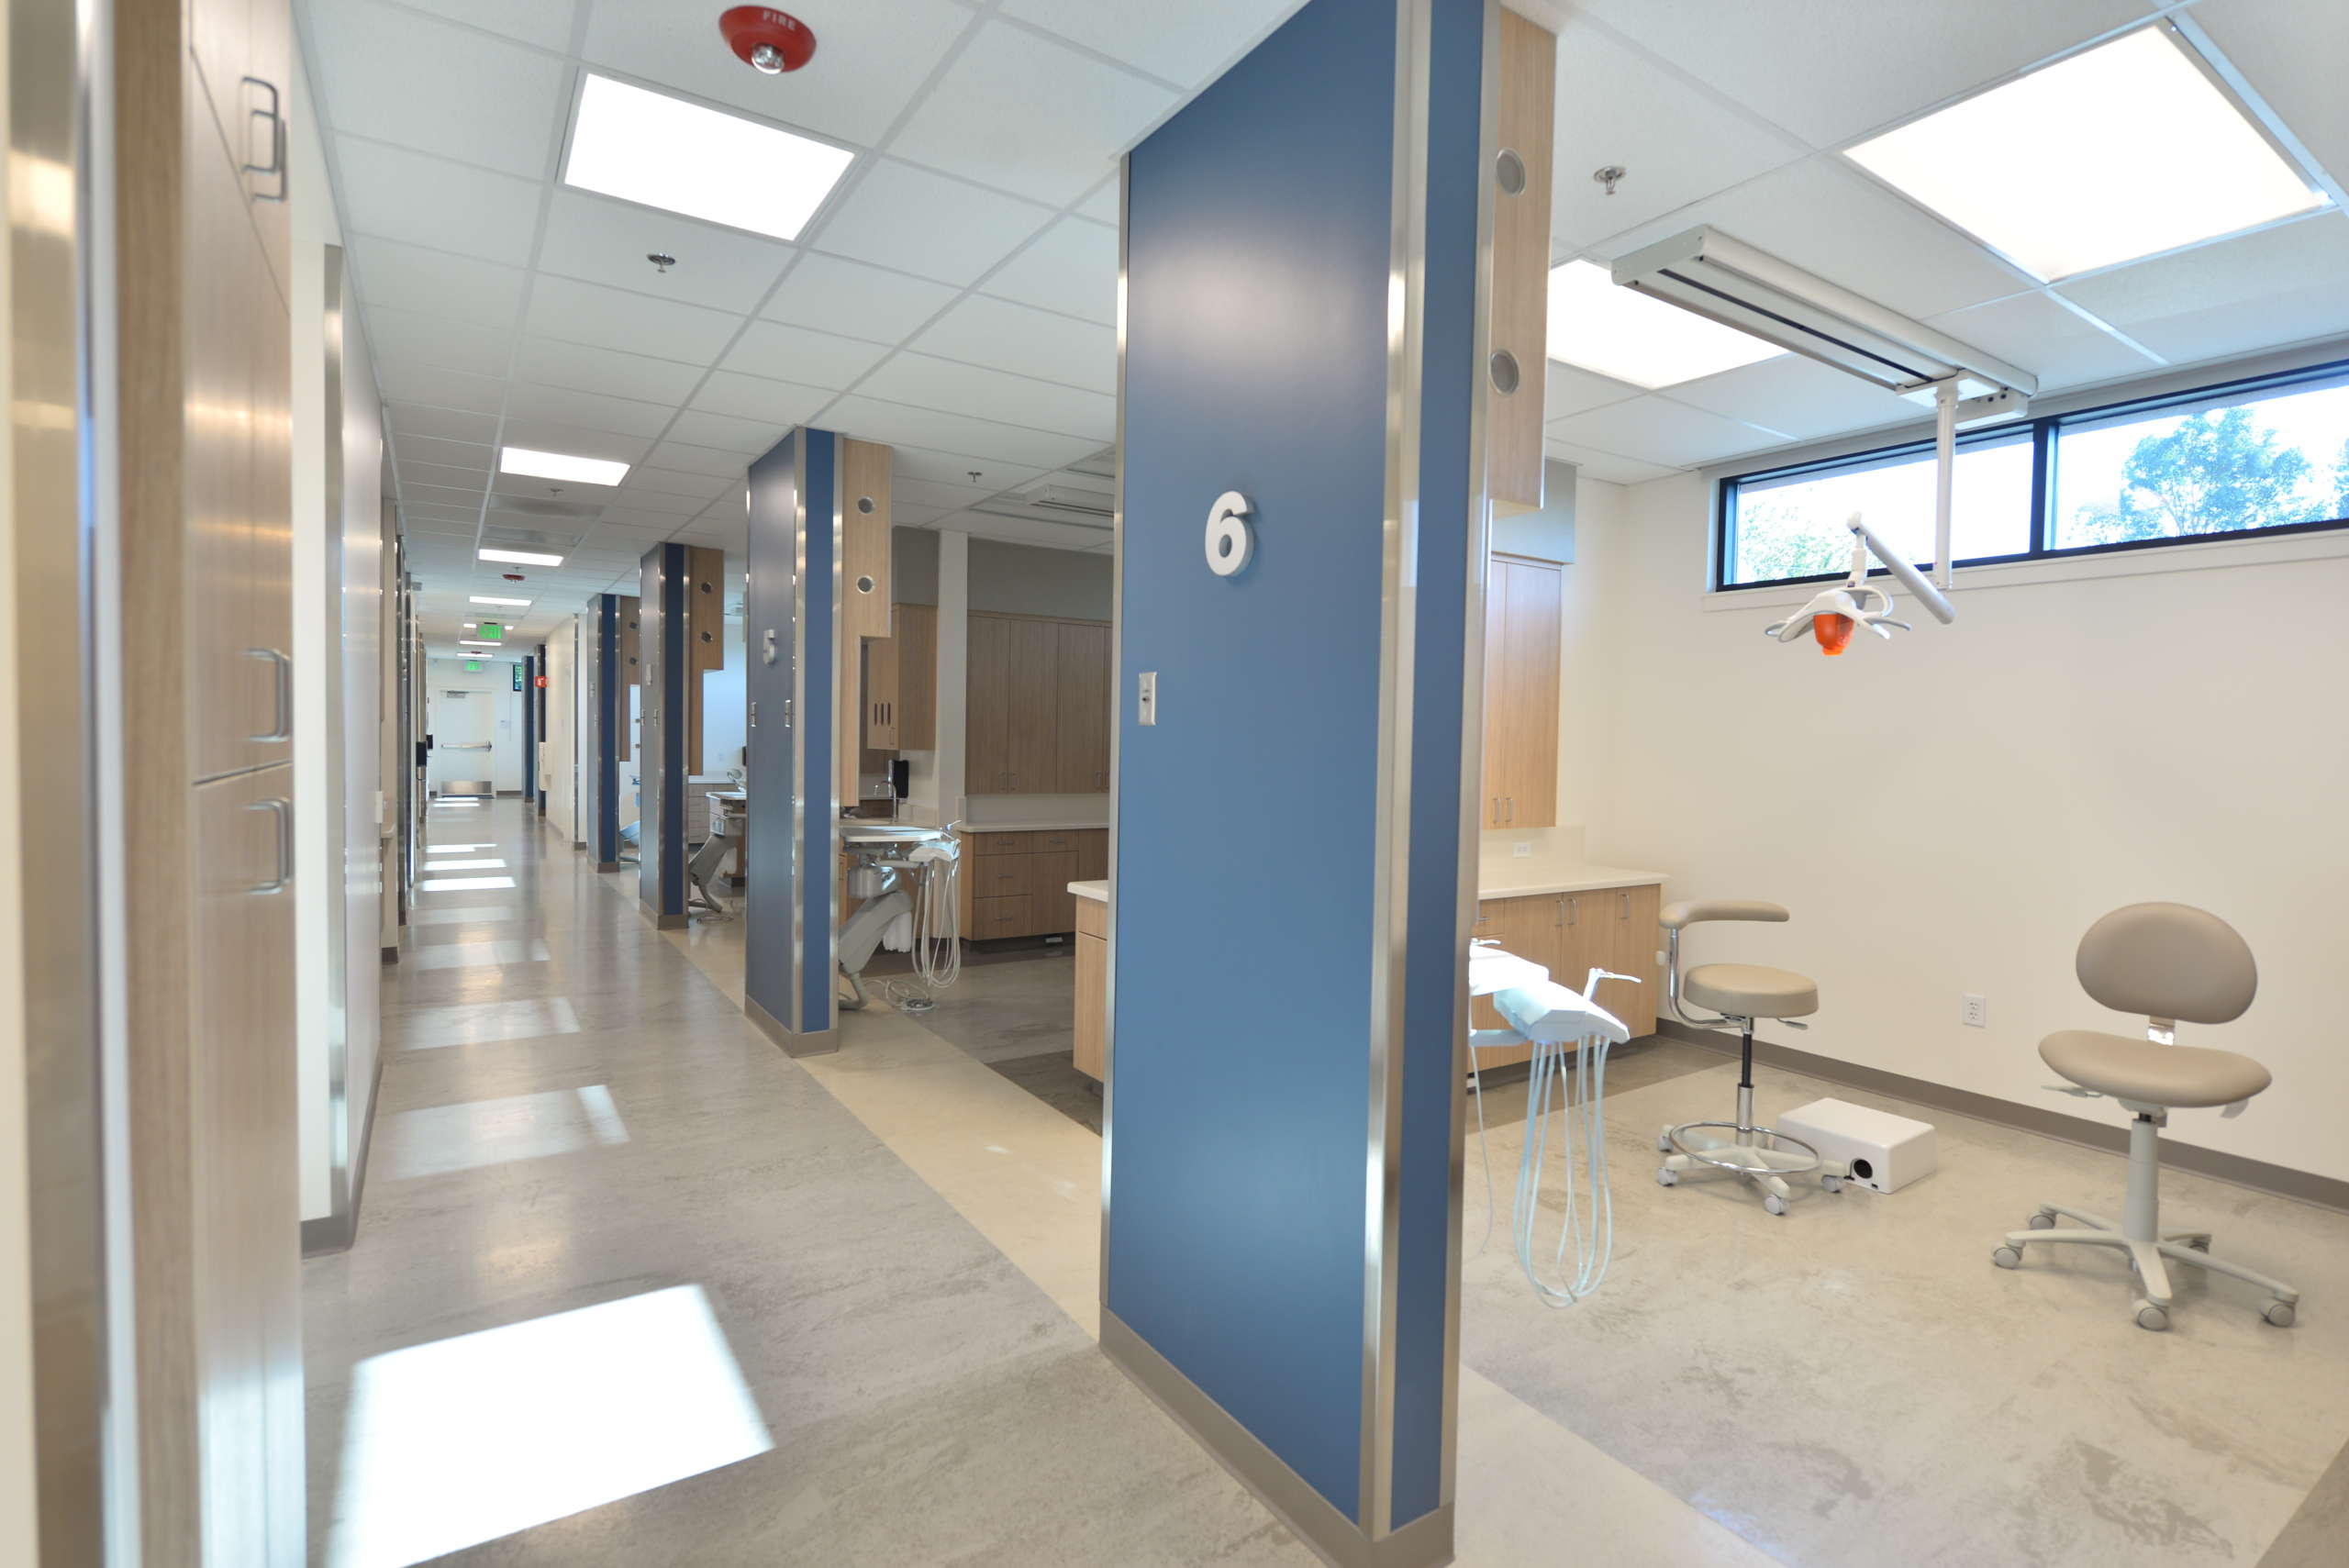 Hallway of patient rooms at the Anderson Family Health & Dental Center at the Shasta Community Health Center